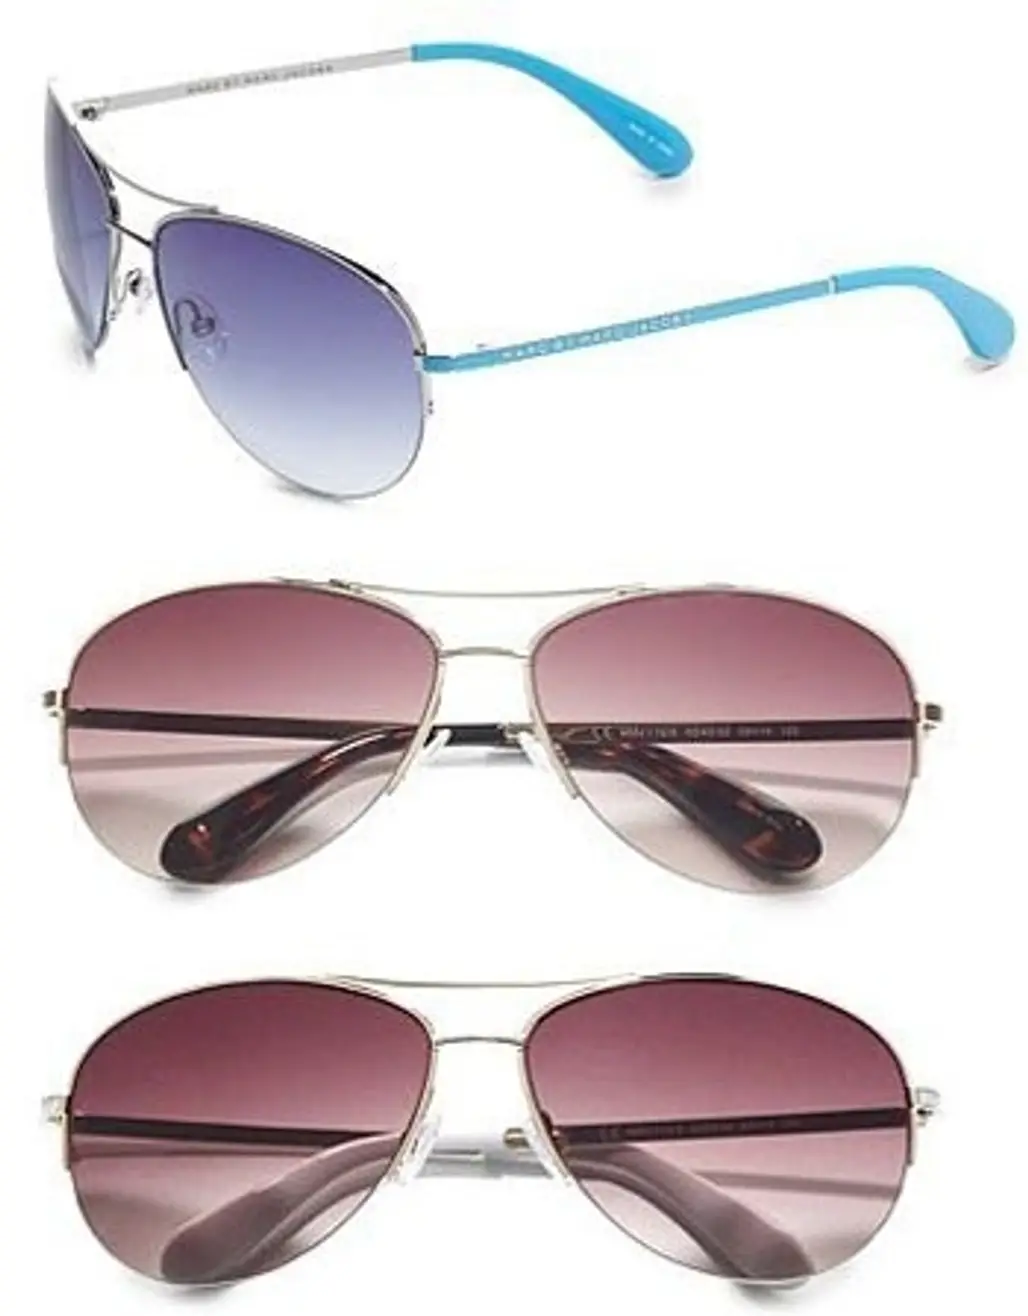 Marc by Marc Jacobs Aviator Sunglasses